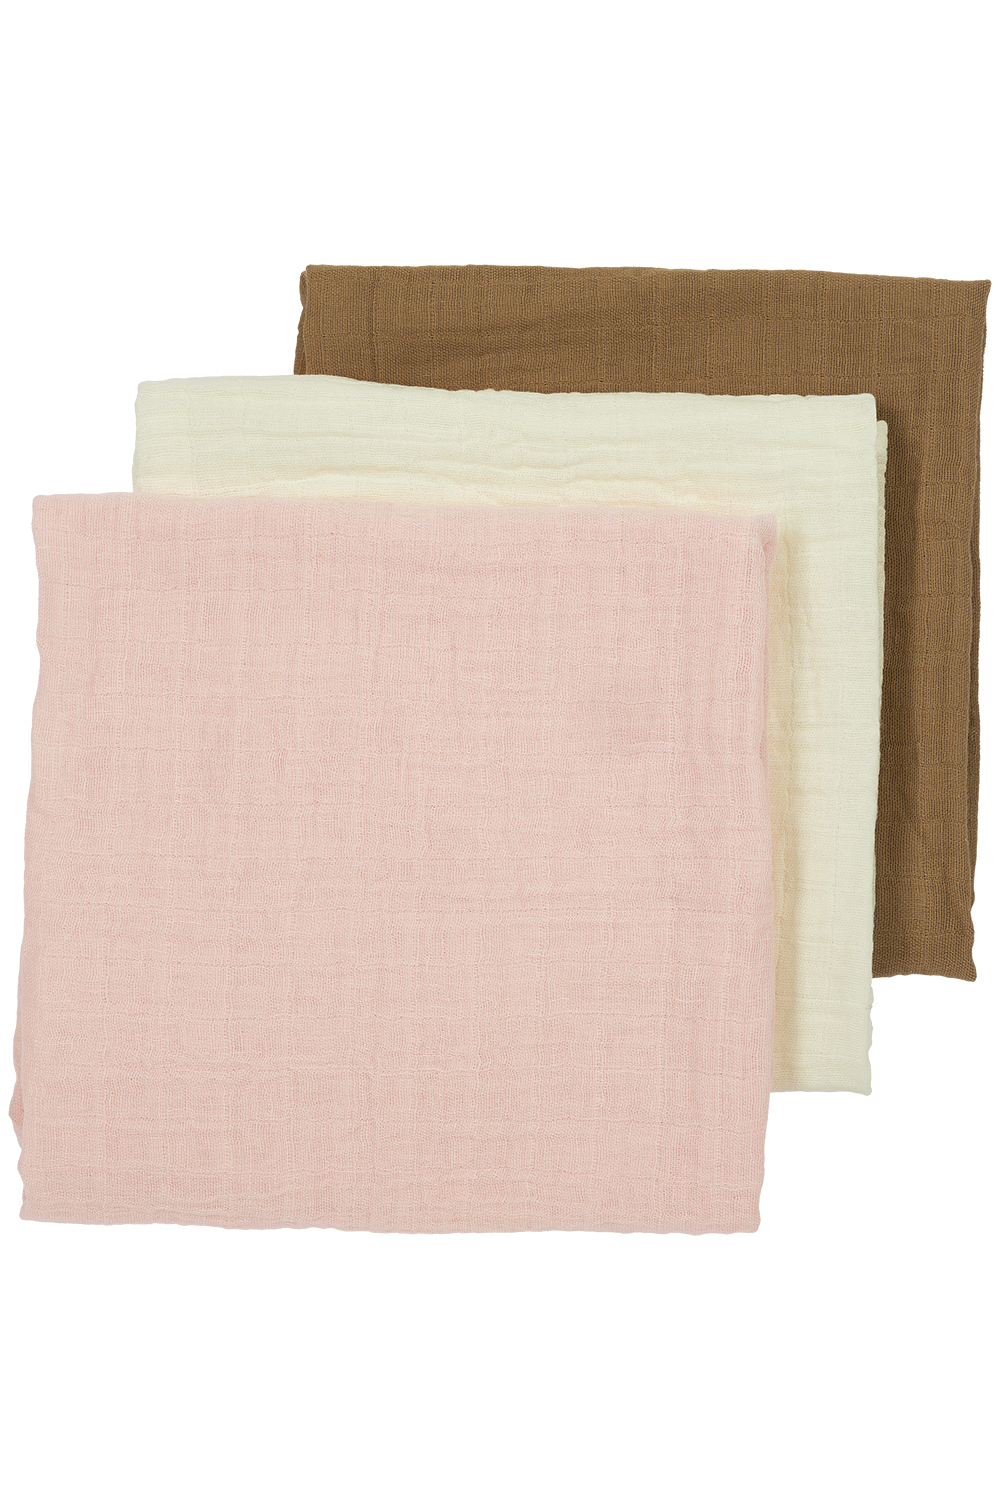 Pre-washed muslin squares 3-pack Uni - offwhite/soft pink/toffee - 70x70cm